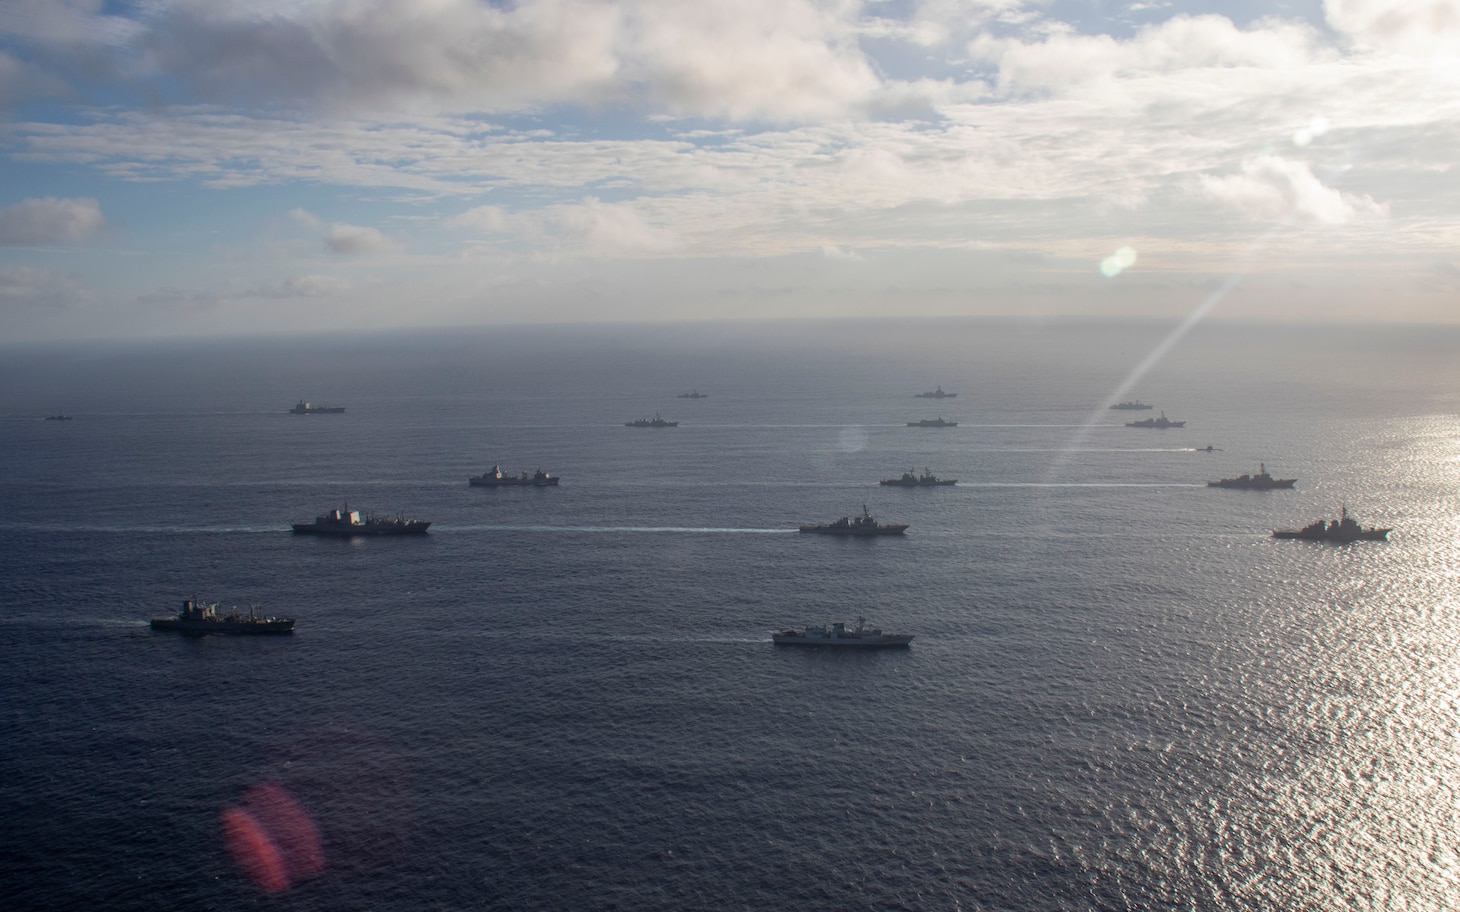 231110-N-TD381-1394 PHILIPPINE SEA (Nov. 10, 2023) Ships from the Japan Maritime Self-Defense Force, Royal Australian Navy, Royal Canadian Navy and United States Navy sail in formation during Annual Exercise (ANNUALEX) 2023. ANNUALEX is a multilateral exercise conducted by naval elements of the Royal Australian, Royal Canadian, Japan Maritime Self-Defense Force, and U.S. navies to demonstrate naval interoperability and a joint commitment to a free and open Indo-Pacific. Vinson, flagship of Carrier Strike Group ONE, is deployed to the U.S. 7th Fleet area of operations in support of a free and open Indo-Pacific. (U.S. Navy photo by Mass Communication Specialist 3rd Class Isaiah Goessl)